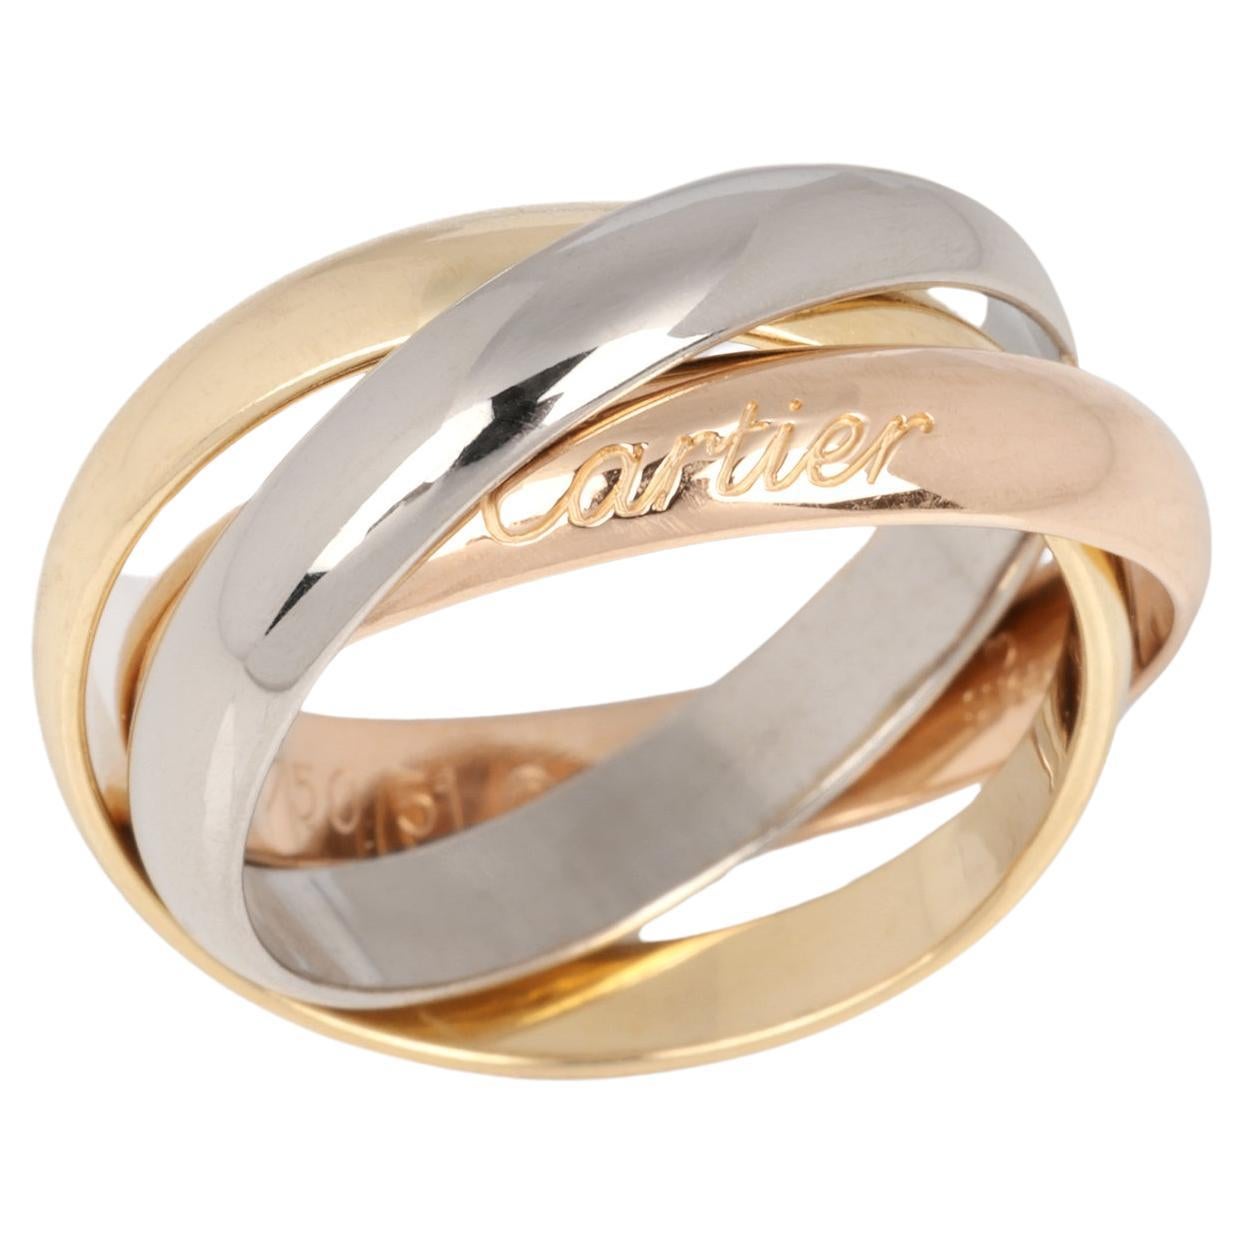 Cartier 18ct White Gold, 18ct Yellow Gold And 18ct Rose Gold Medium Trinity Ring